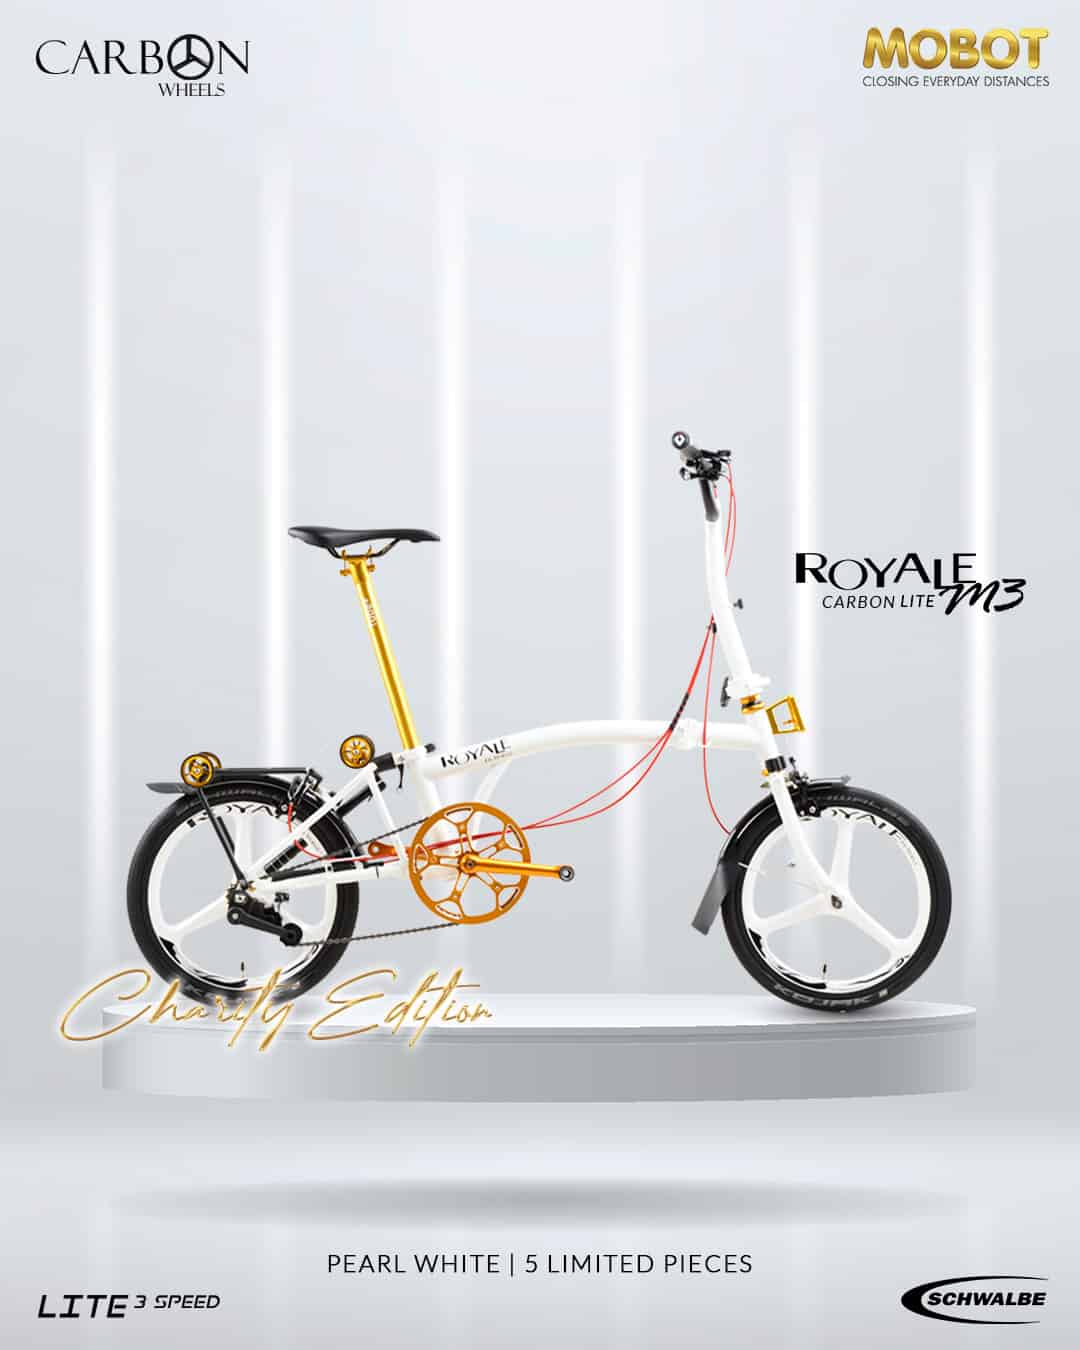 ROYALE Carbon Lite M3 foldable bicycle Charity Limited Edition - Special Editions